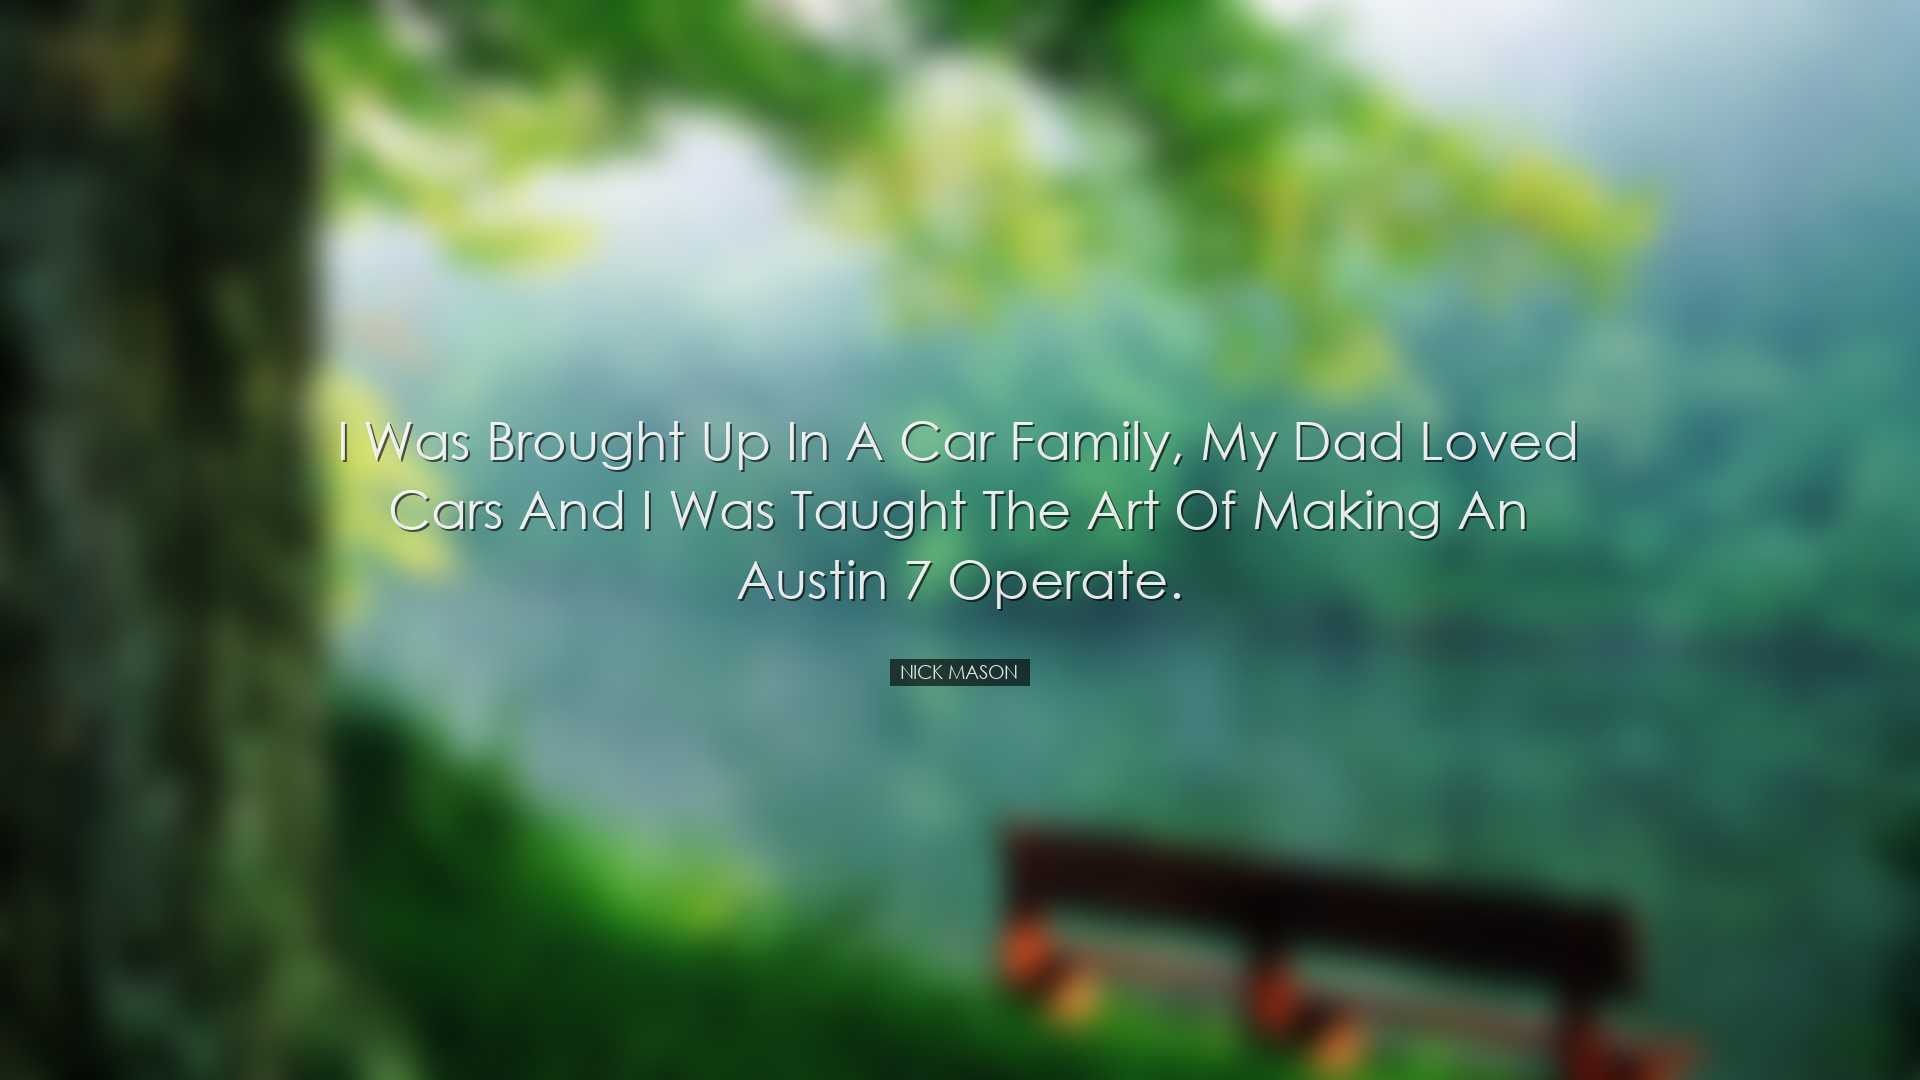 I was brought up in a car family, my dad loved cars and I was taug